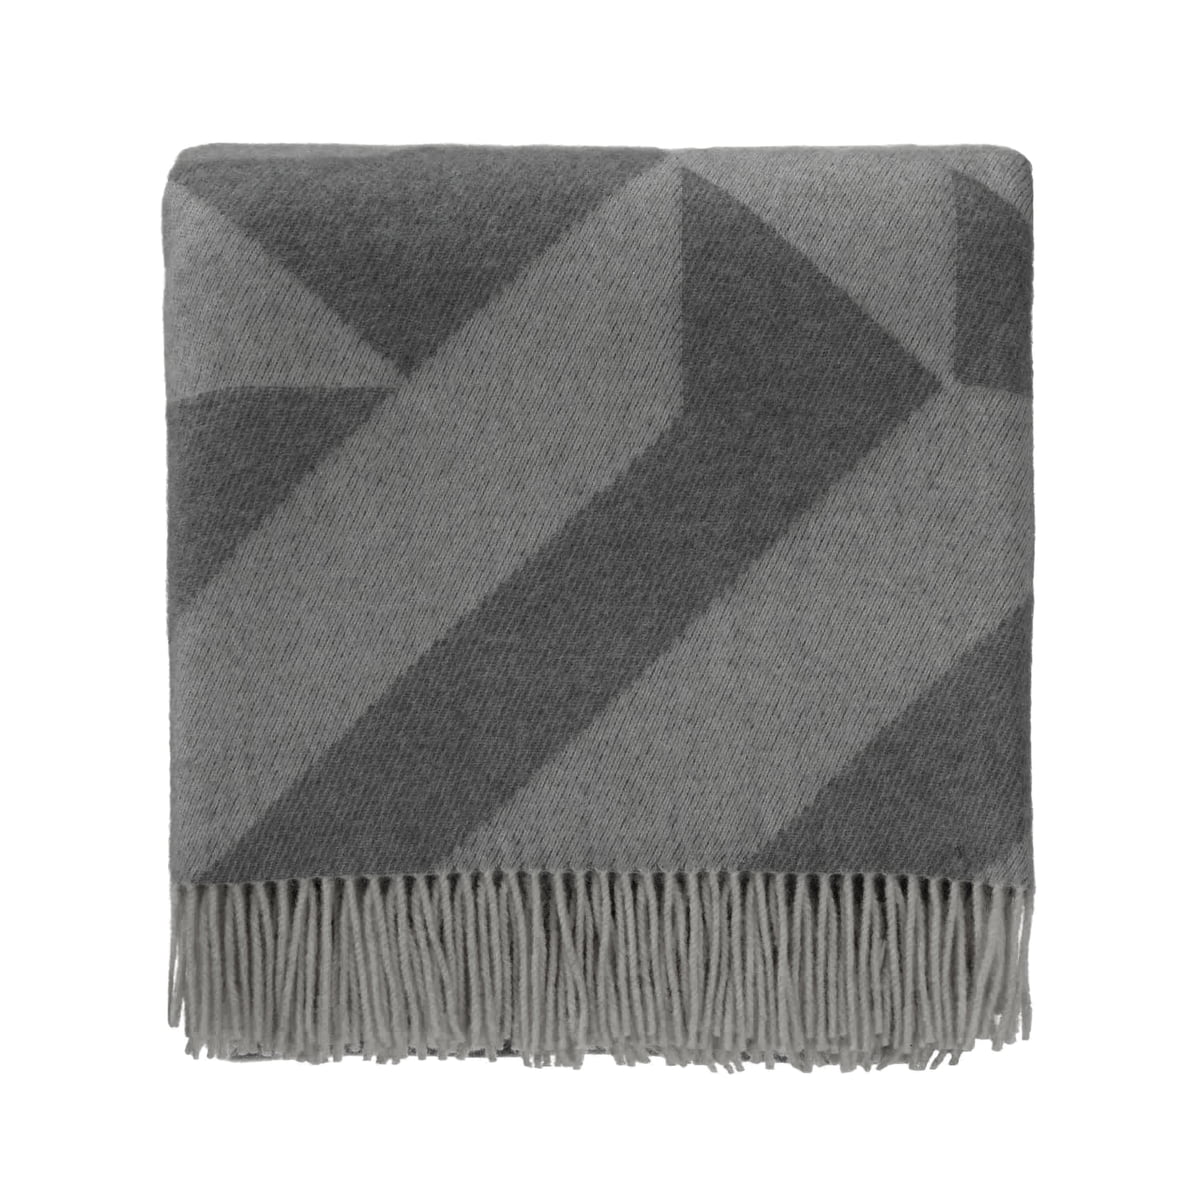 Farum blanket with fringes | Connox